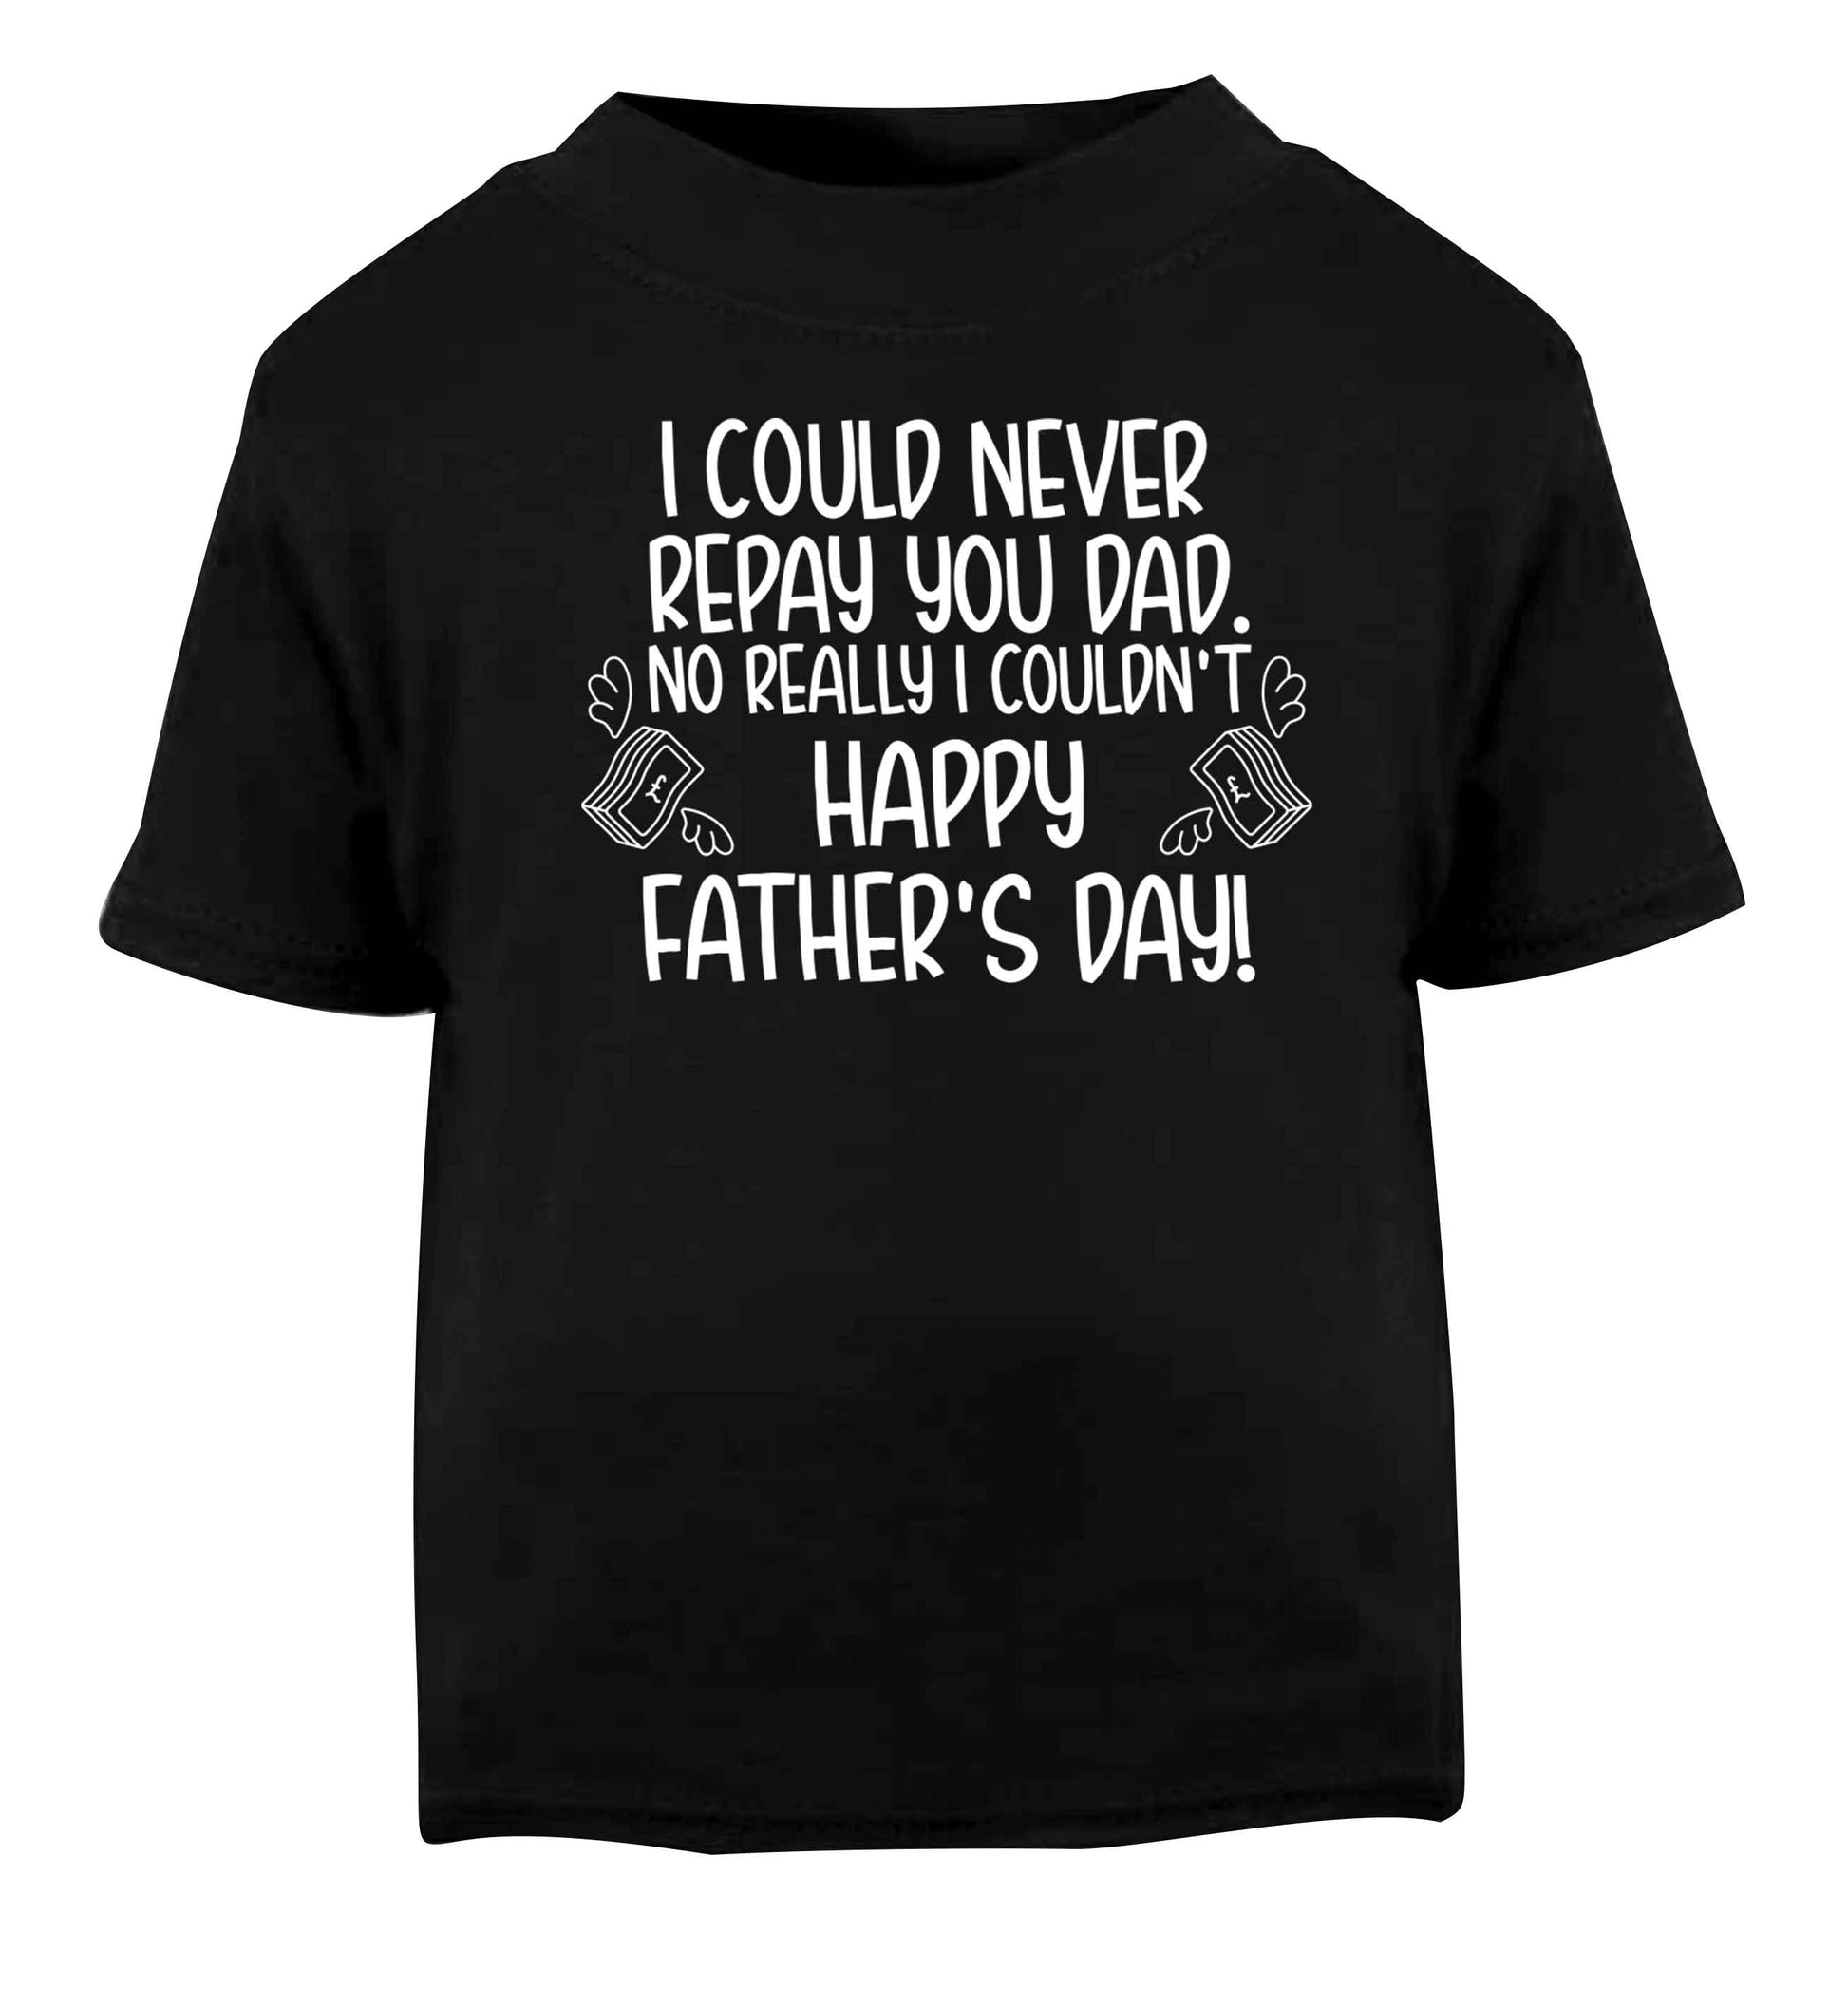 I could never repay you dad. No I really couldn't happy Father's day! Black baby toddler Tshirt 2 years